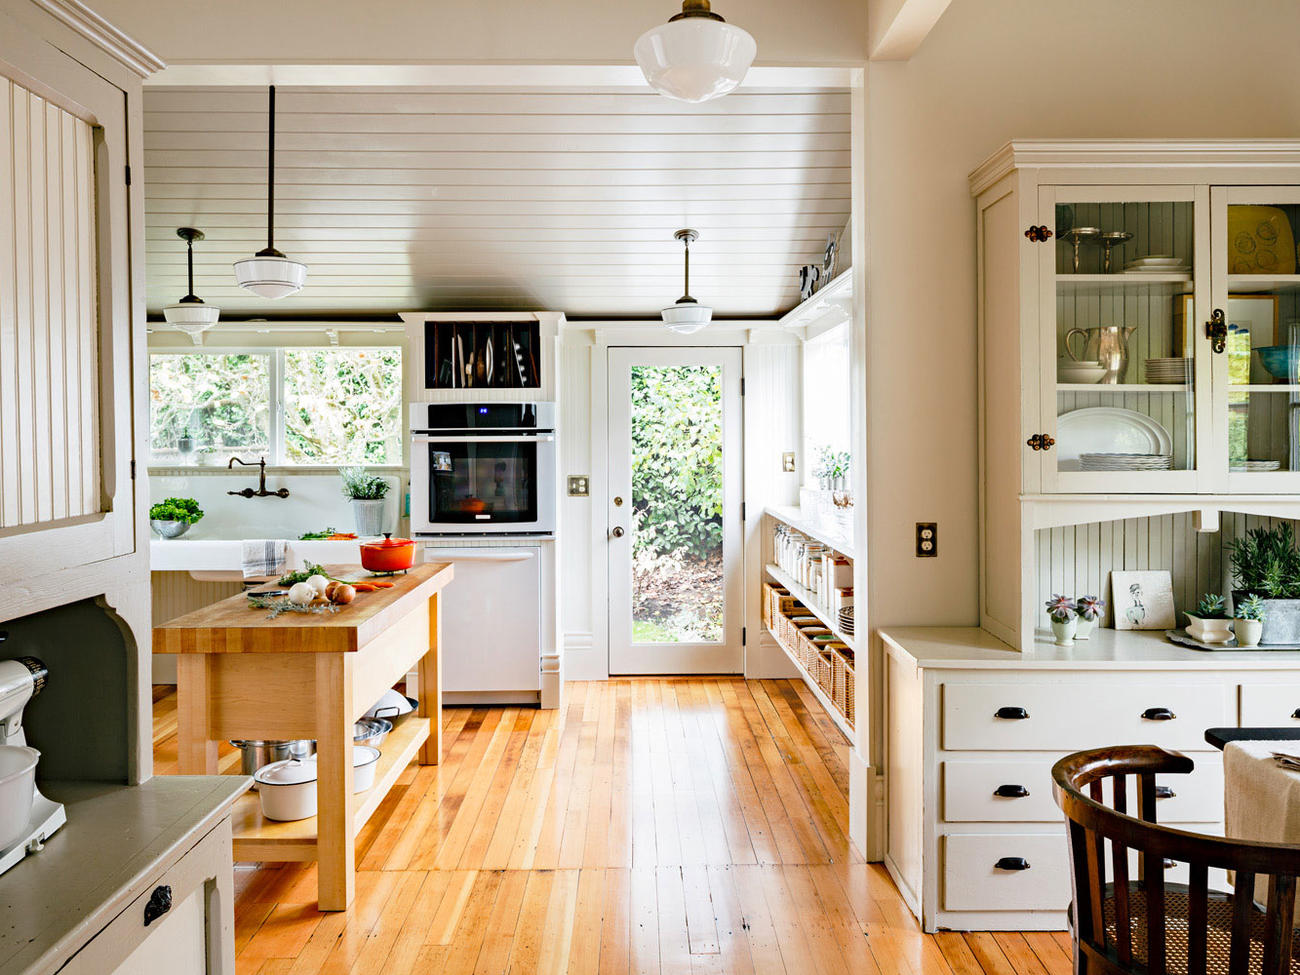 Beyond Shaker style: how to create a kitchen with character